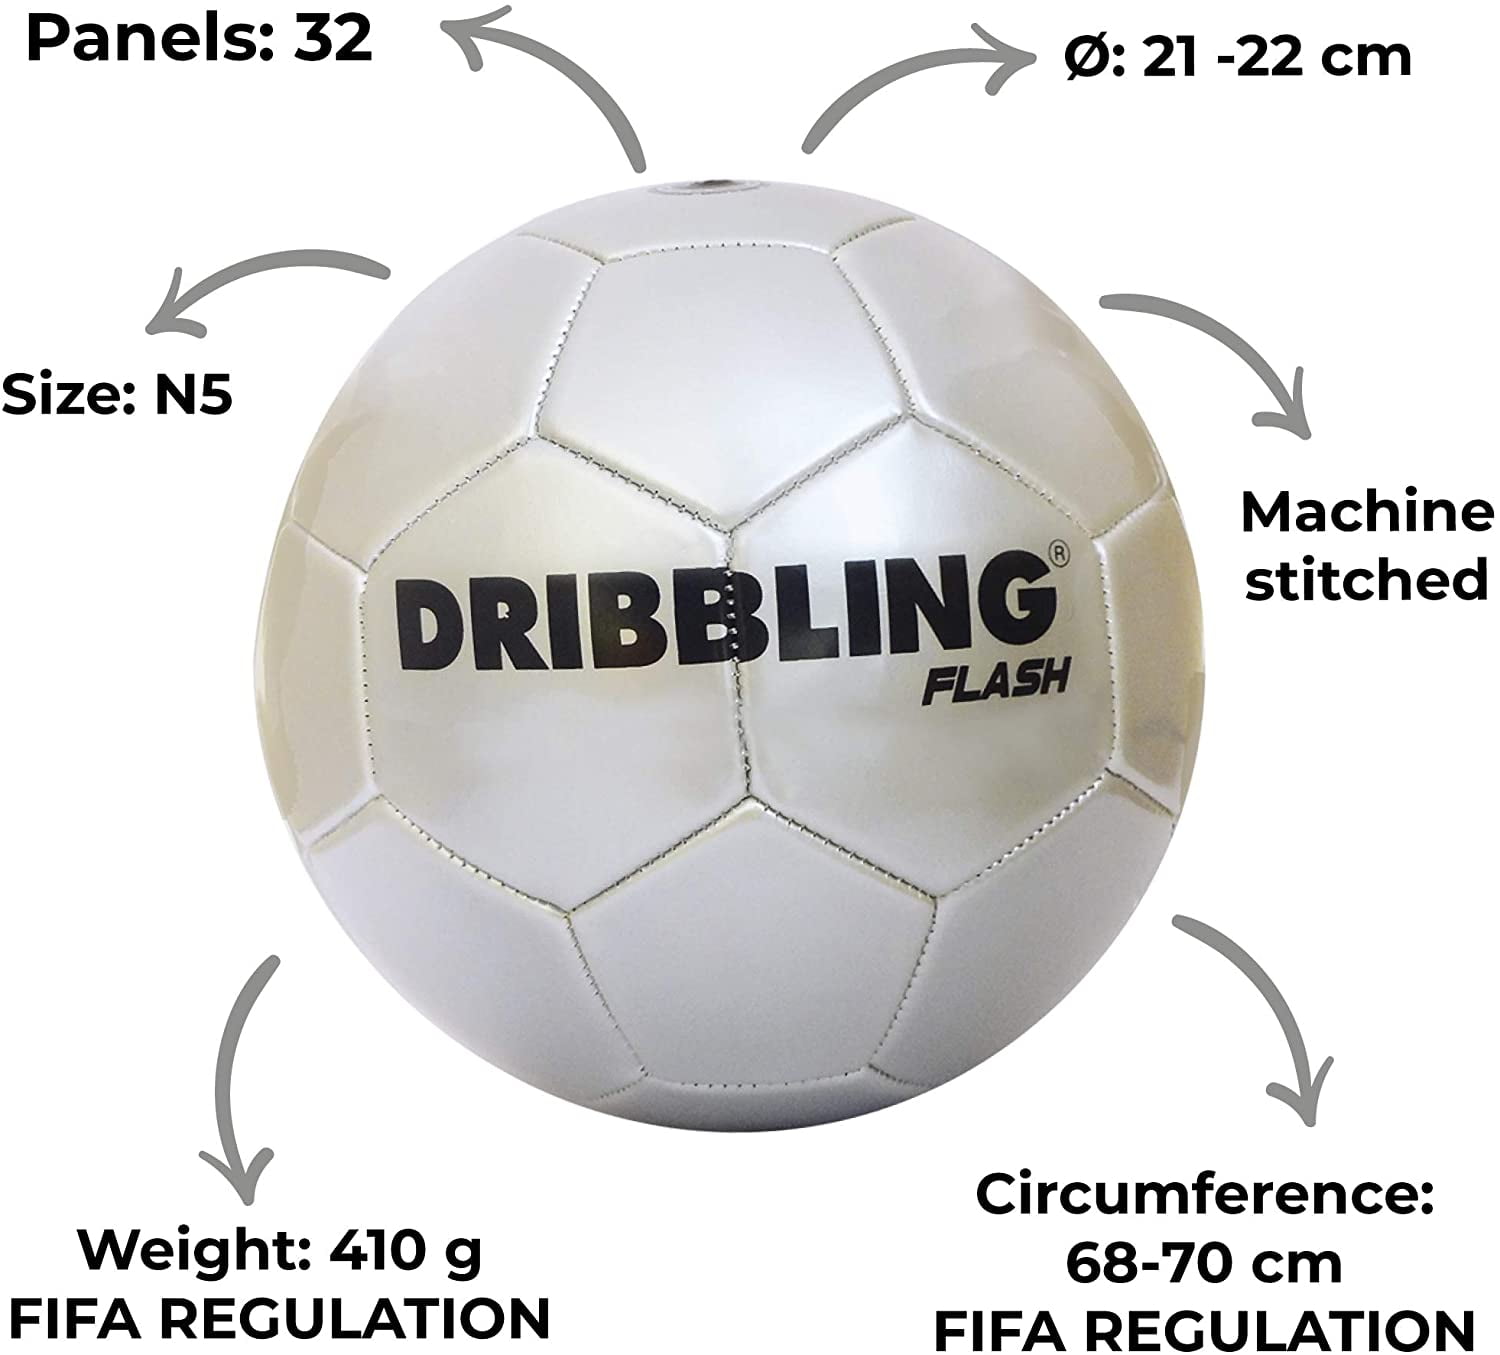 Drb Dribbling Soccer Training Flash Ball Wit Air Pump Official Size N 5 Machine Sewed Durable Pvc Thread Lining Smooth Re Creative For Colleges High School Walmart Com Walmart Com